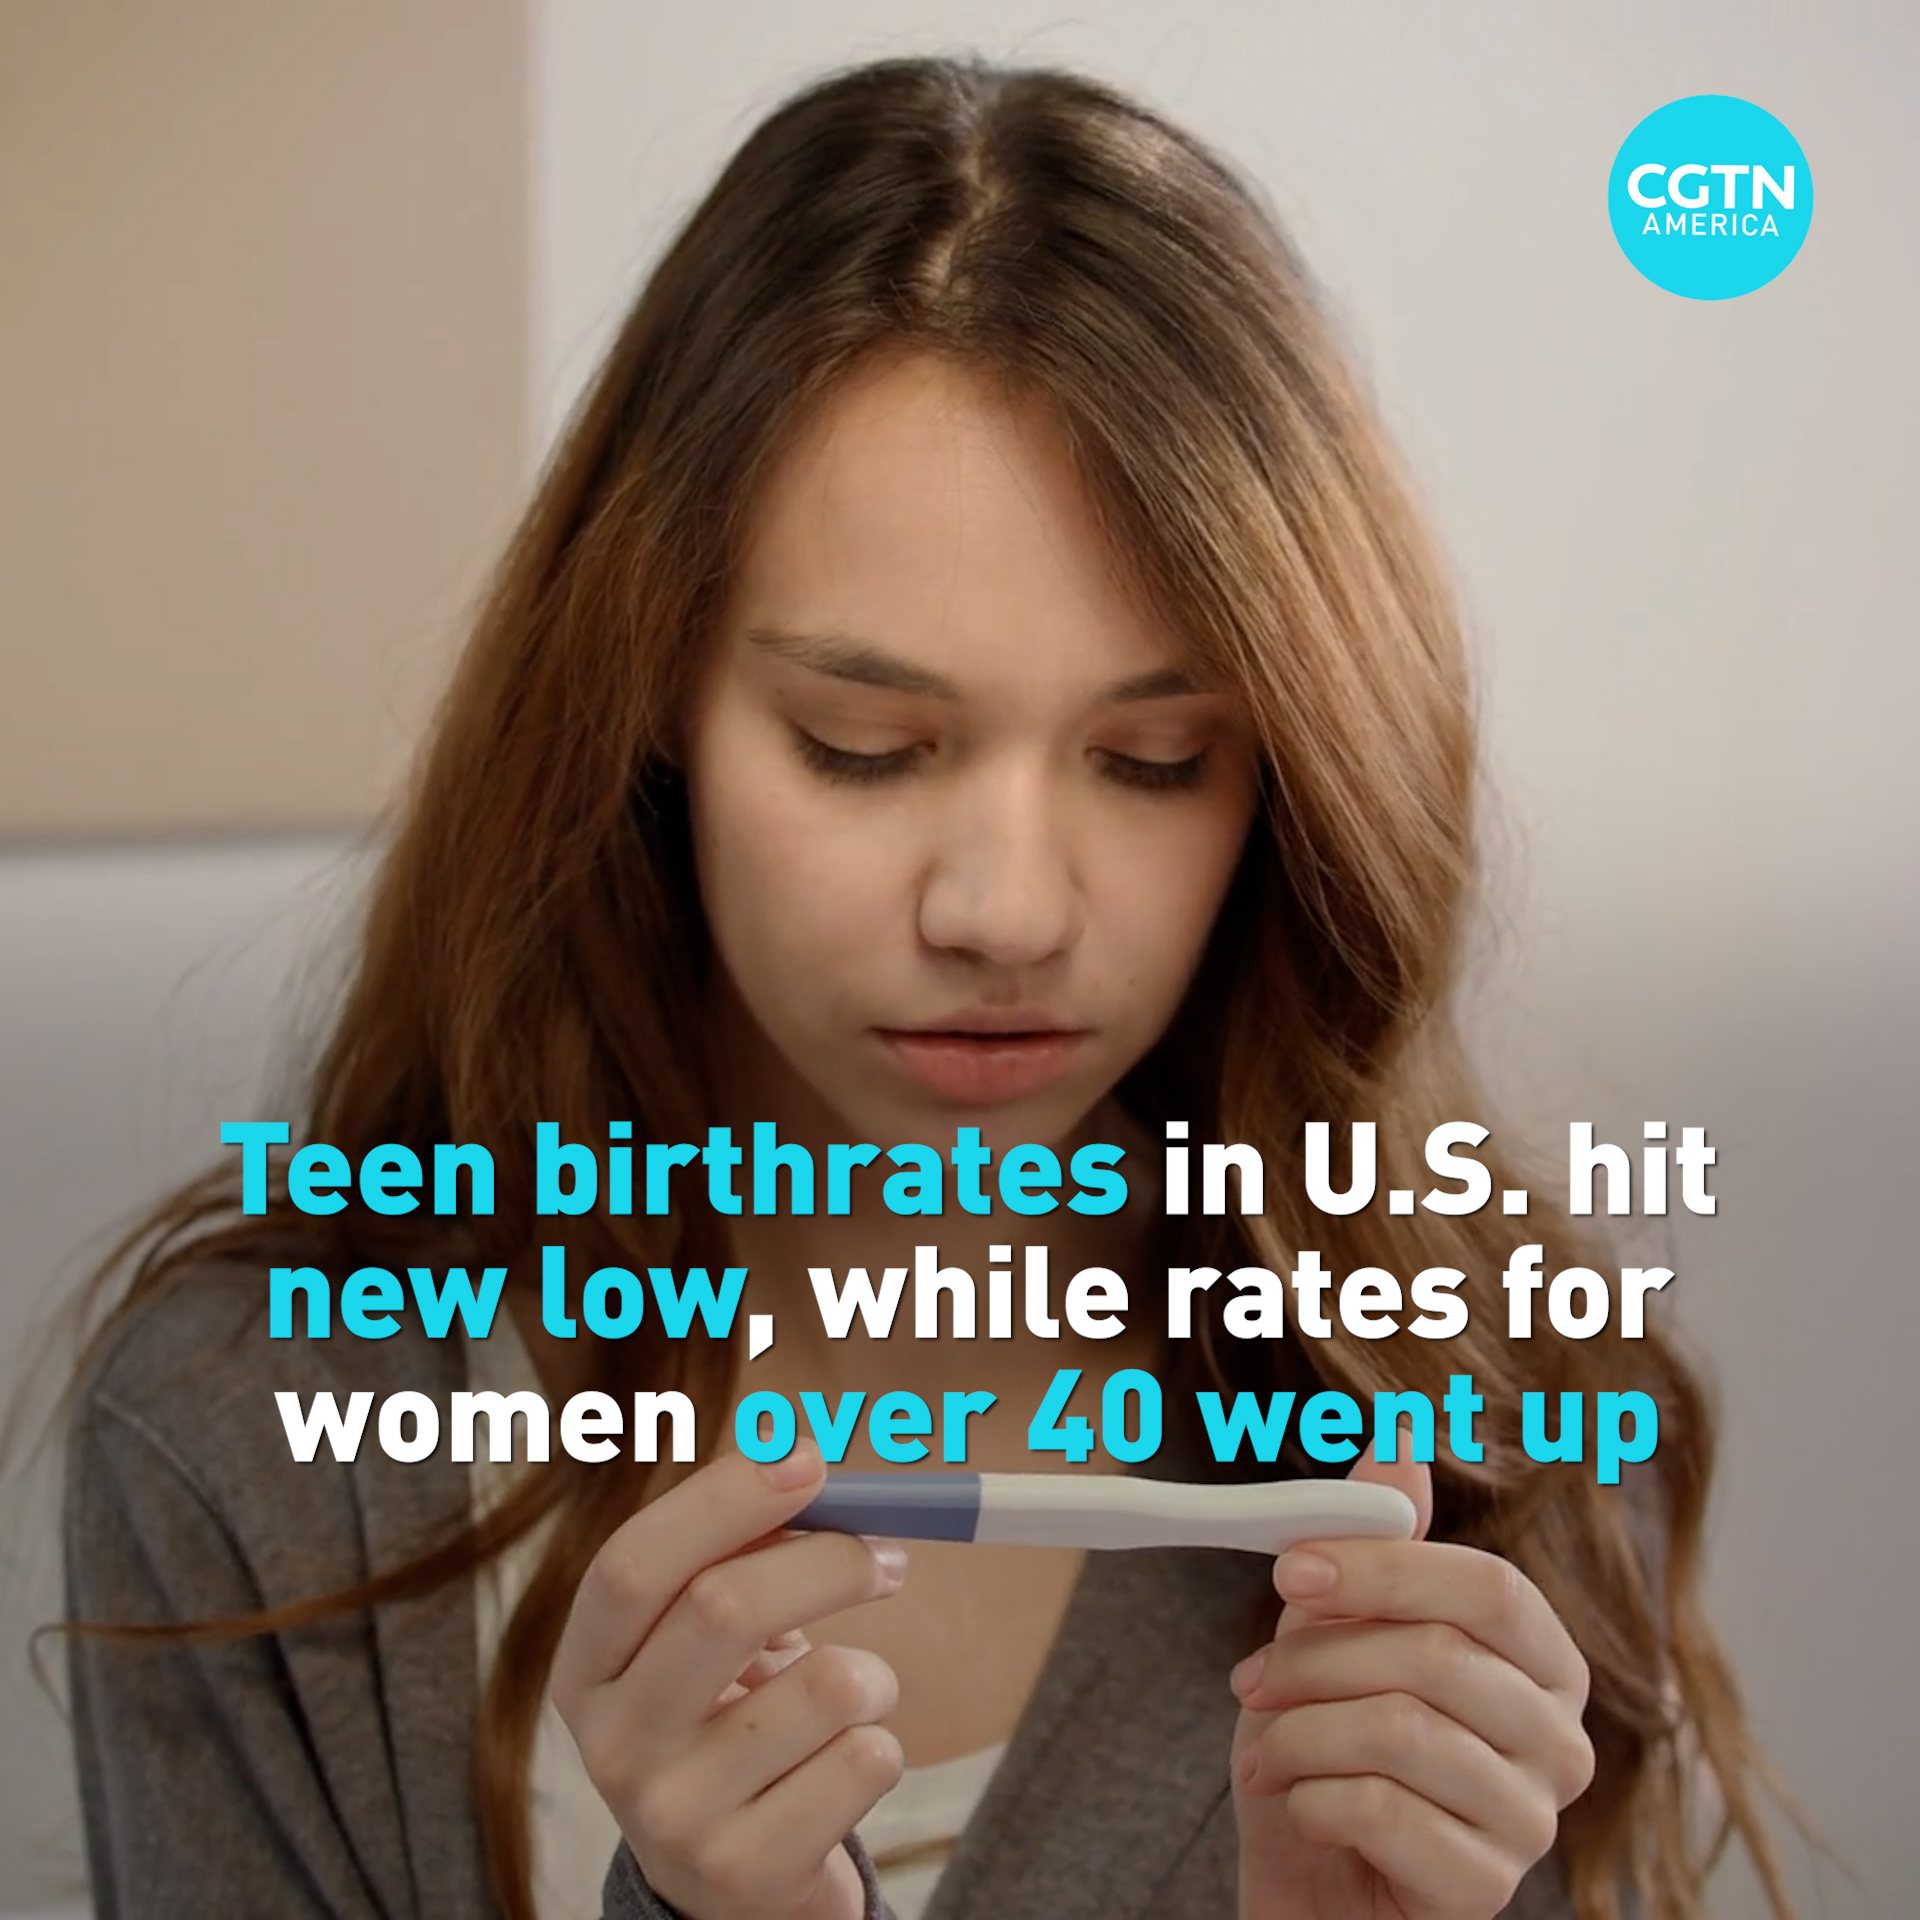 Teen birthrate in U.S. drops to lowest level while rate for women over 40 rises